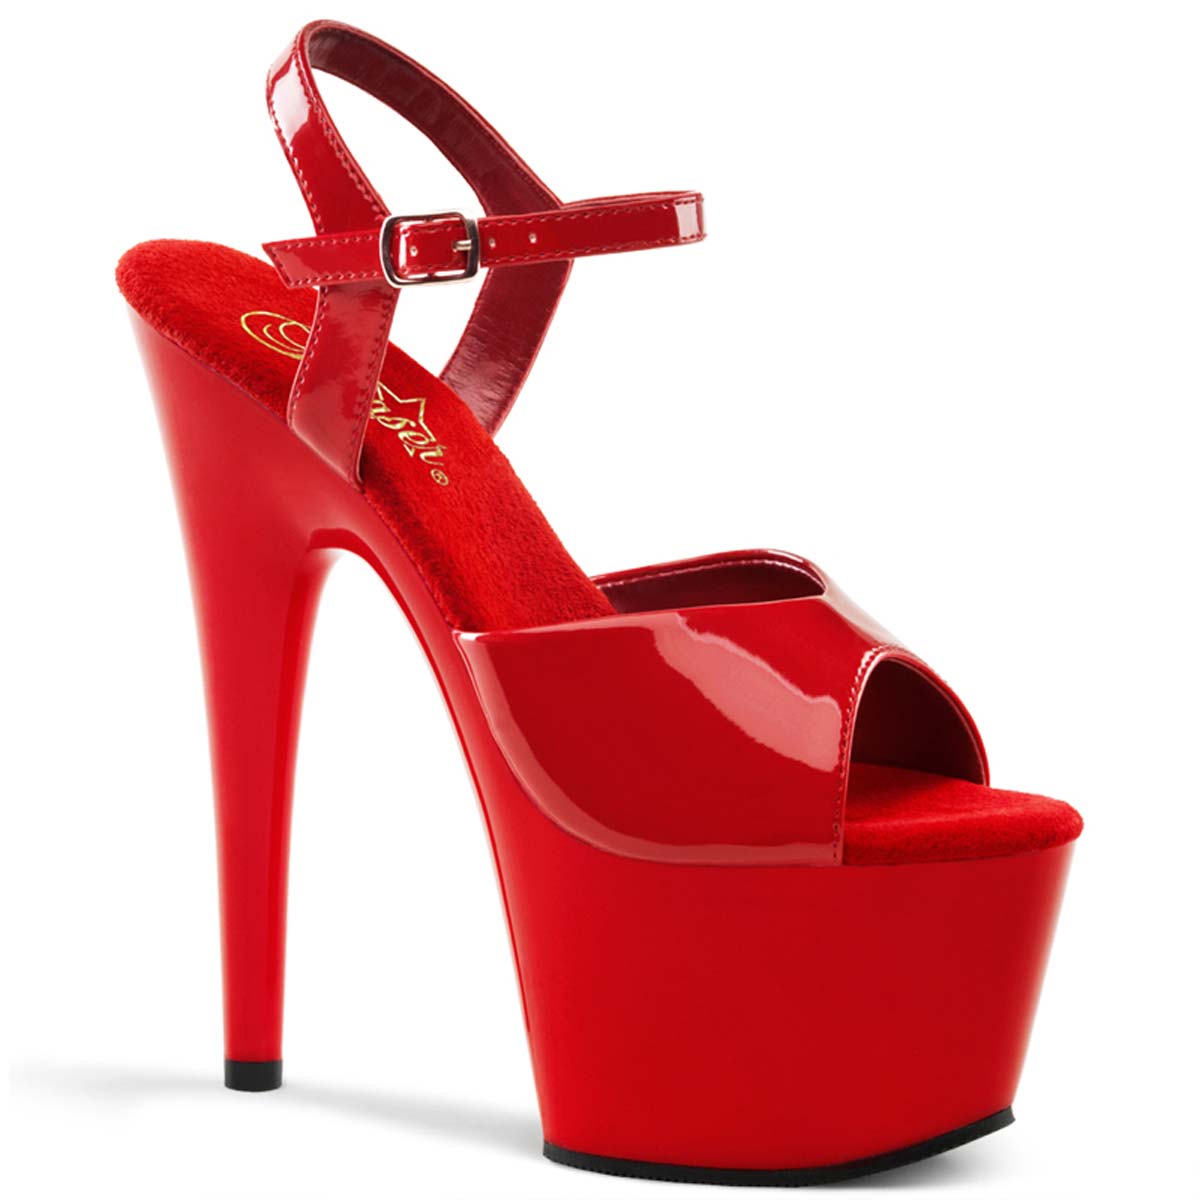 Pleaser Adore-709 - Red/Red in Sexy Heels & Platforms - $53.95